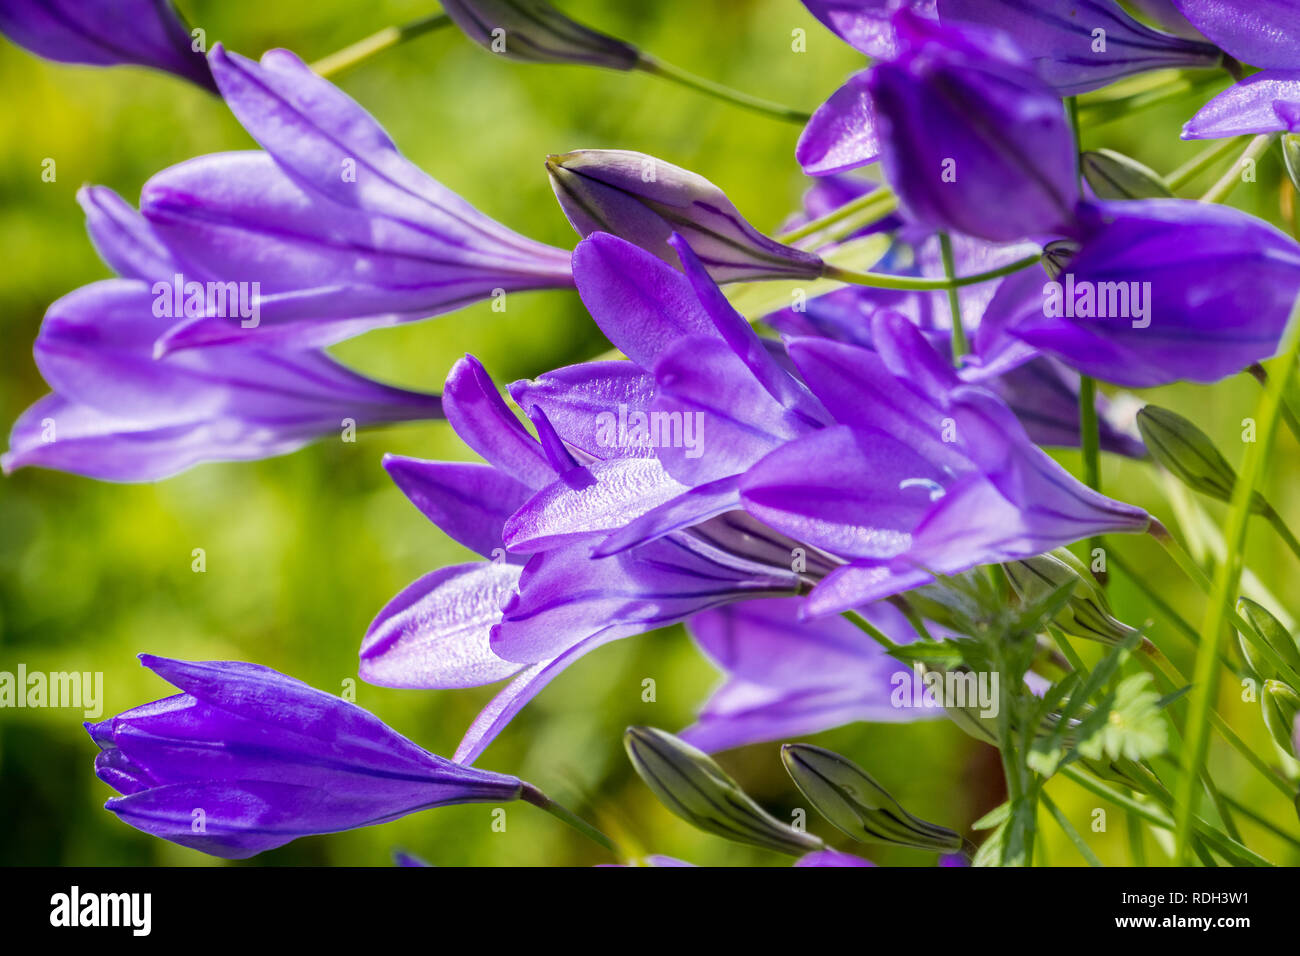 Ithuriel's spear (Triteleia laxa) blooming in Stebbins Cold Canyon, Napa Valley, California Stock Photo